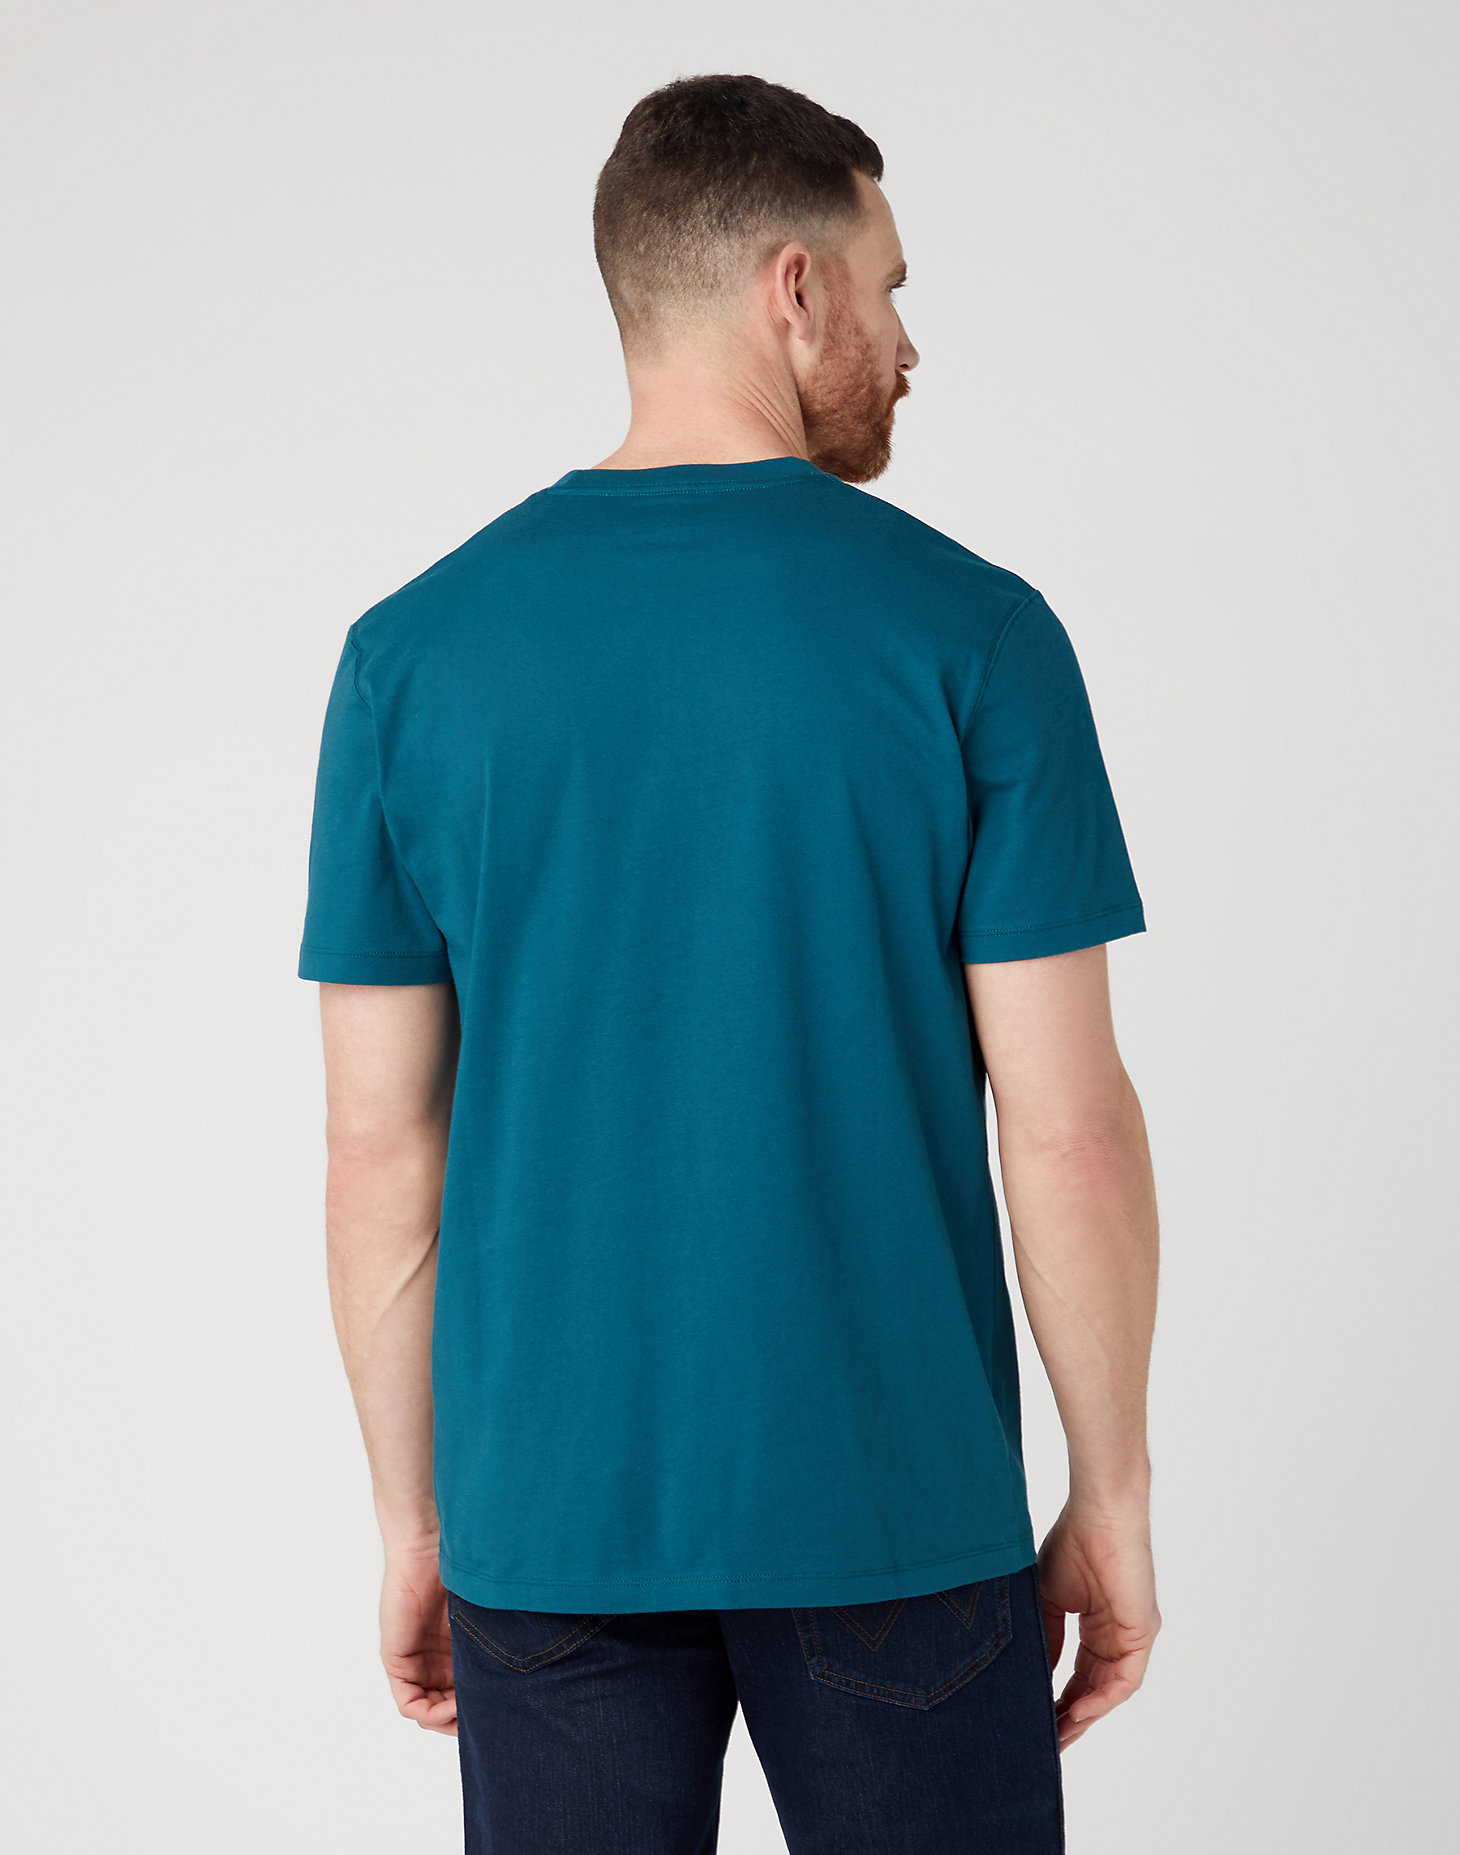 Sign Off Tee in Deep Teal Green alternative view 2